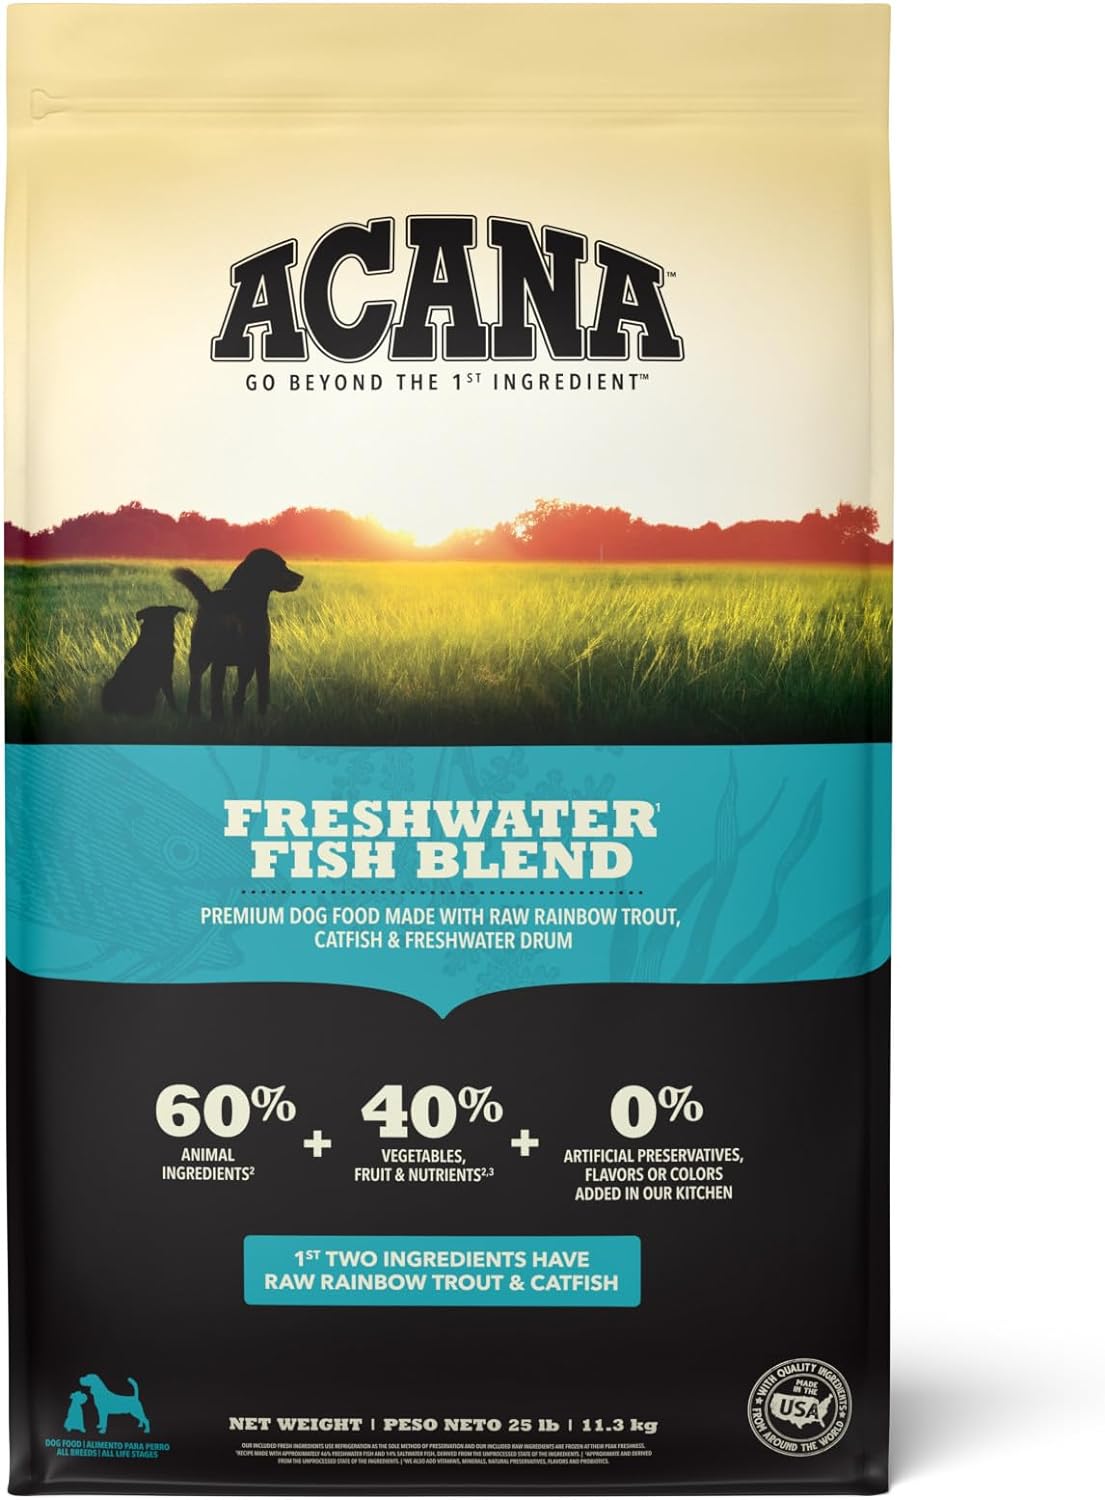 Acana Freshwater Fish Blend Dry Dog Food – Gallery Image 1